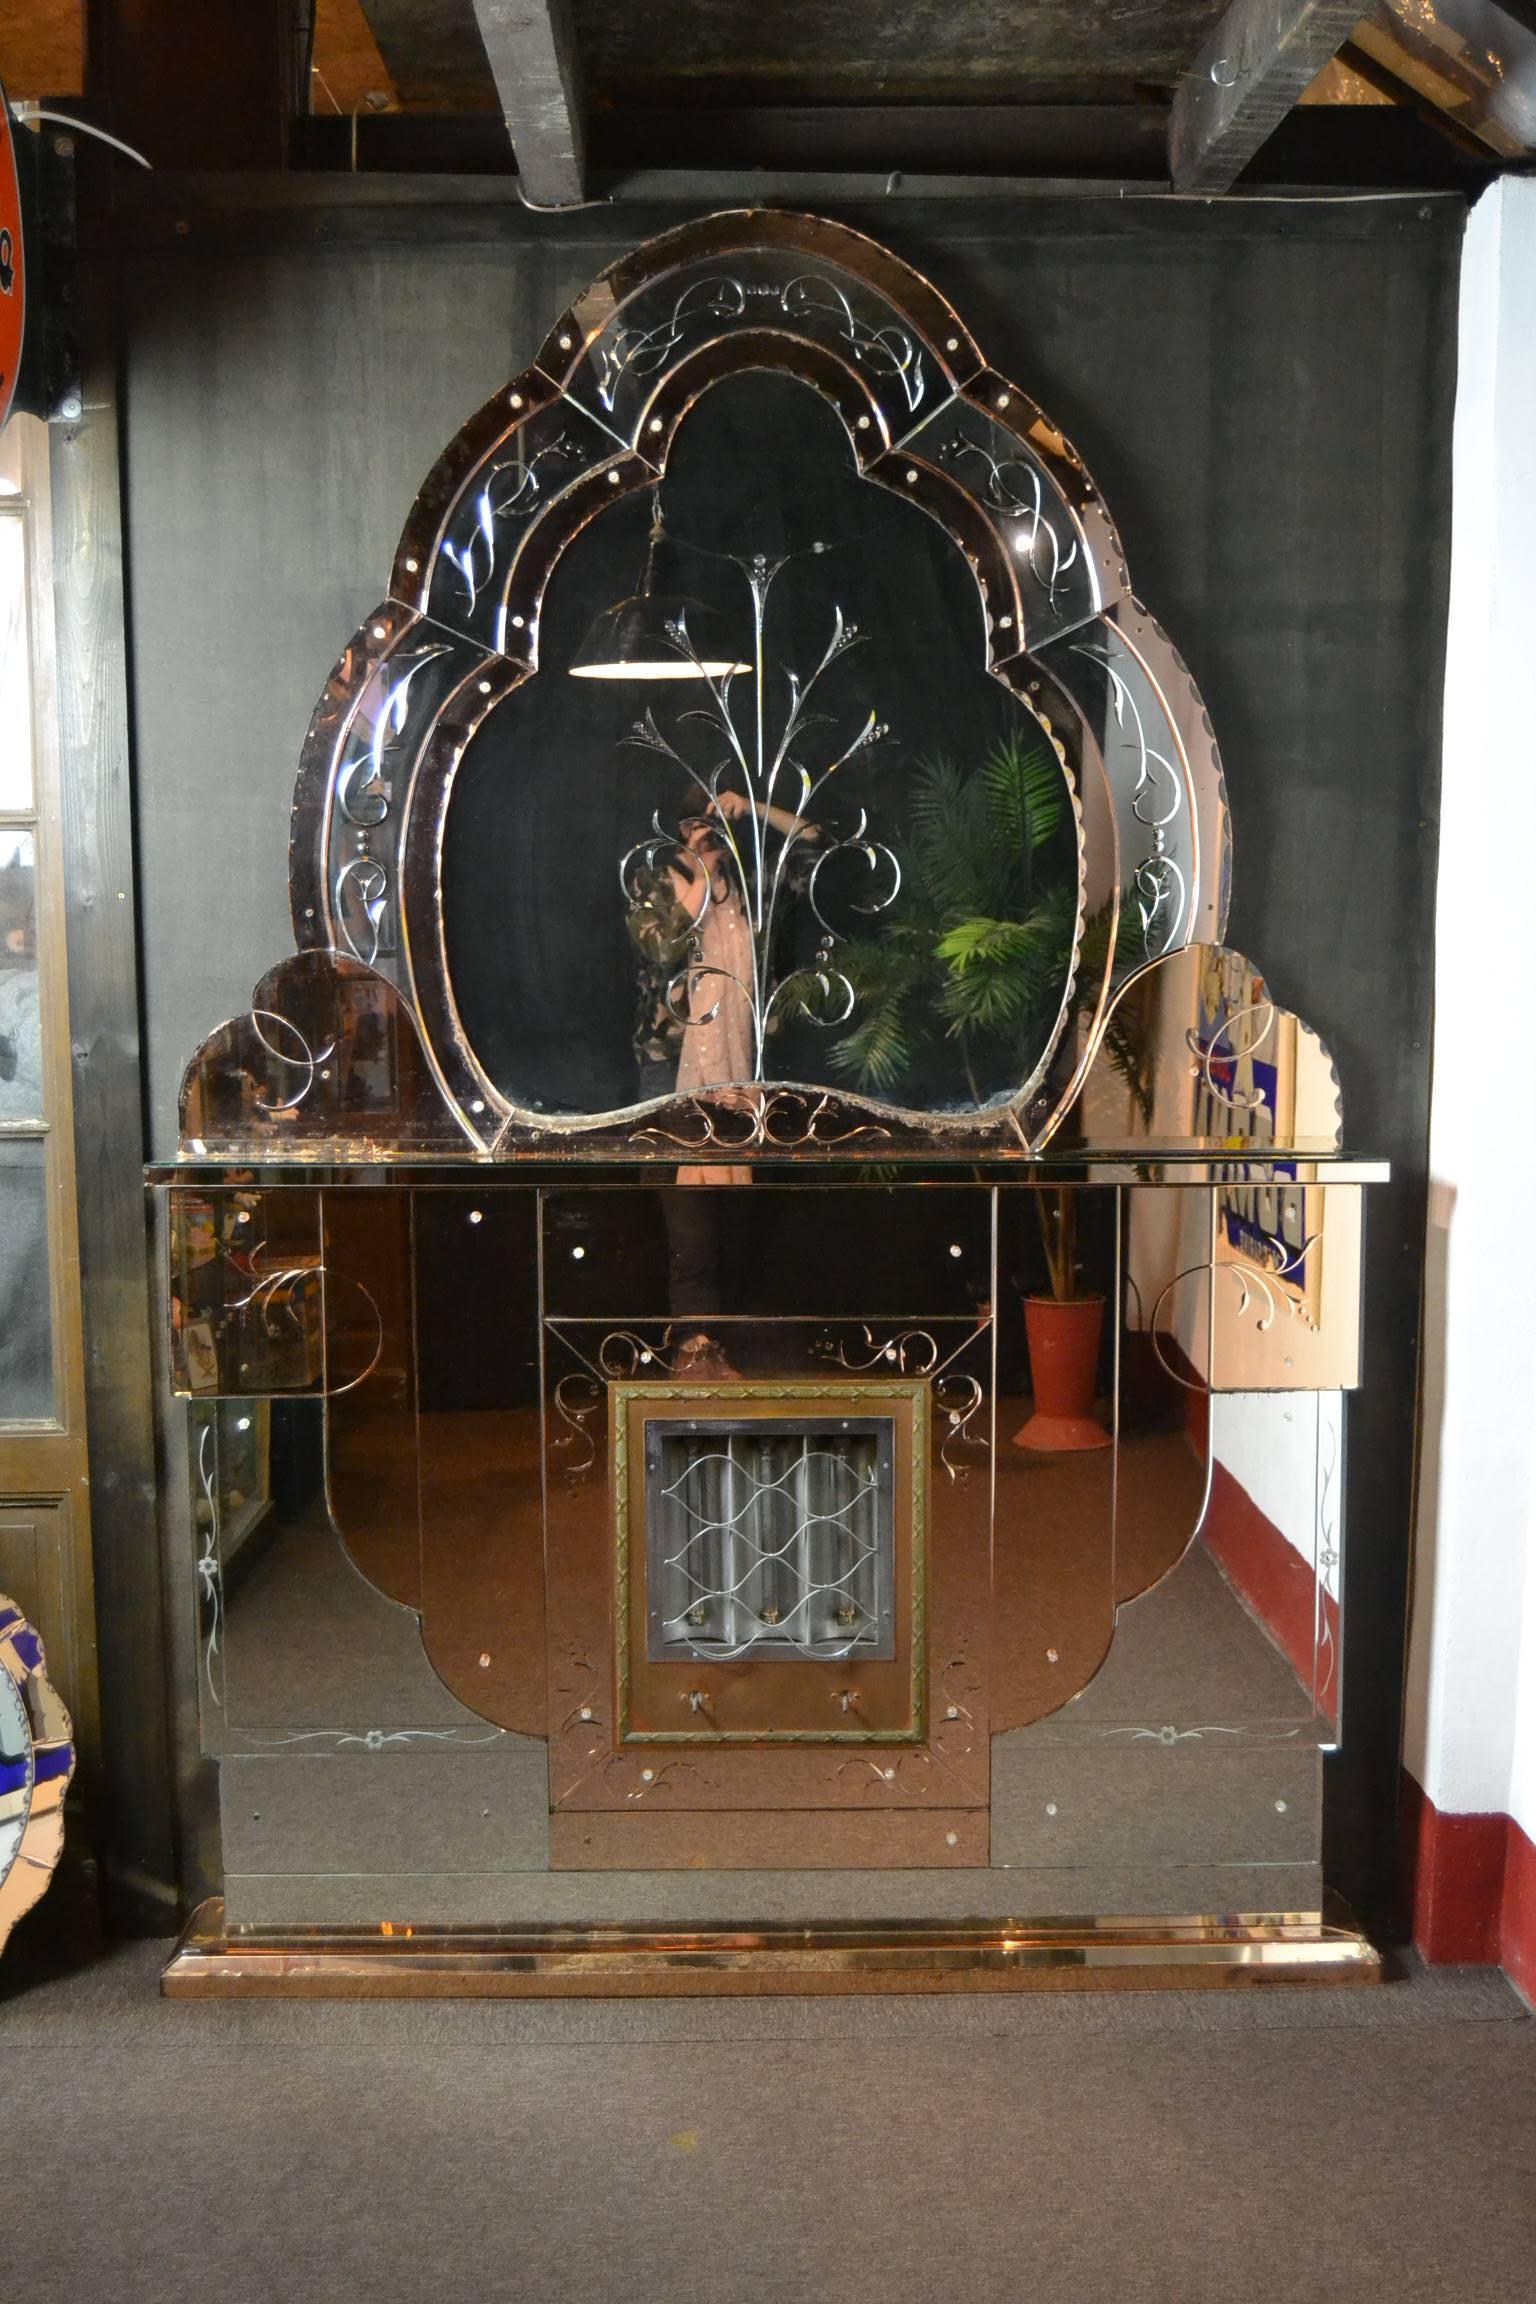 1930s electric fire